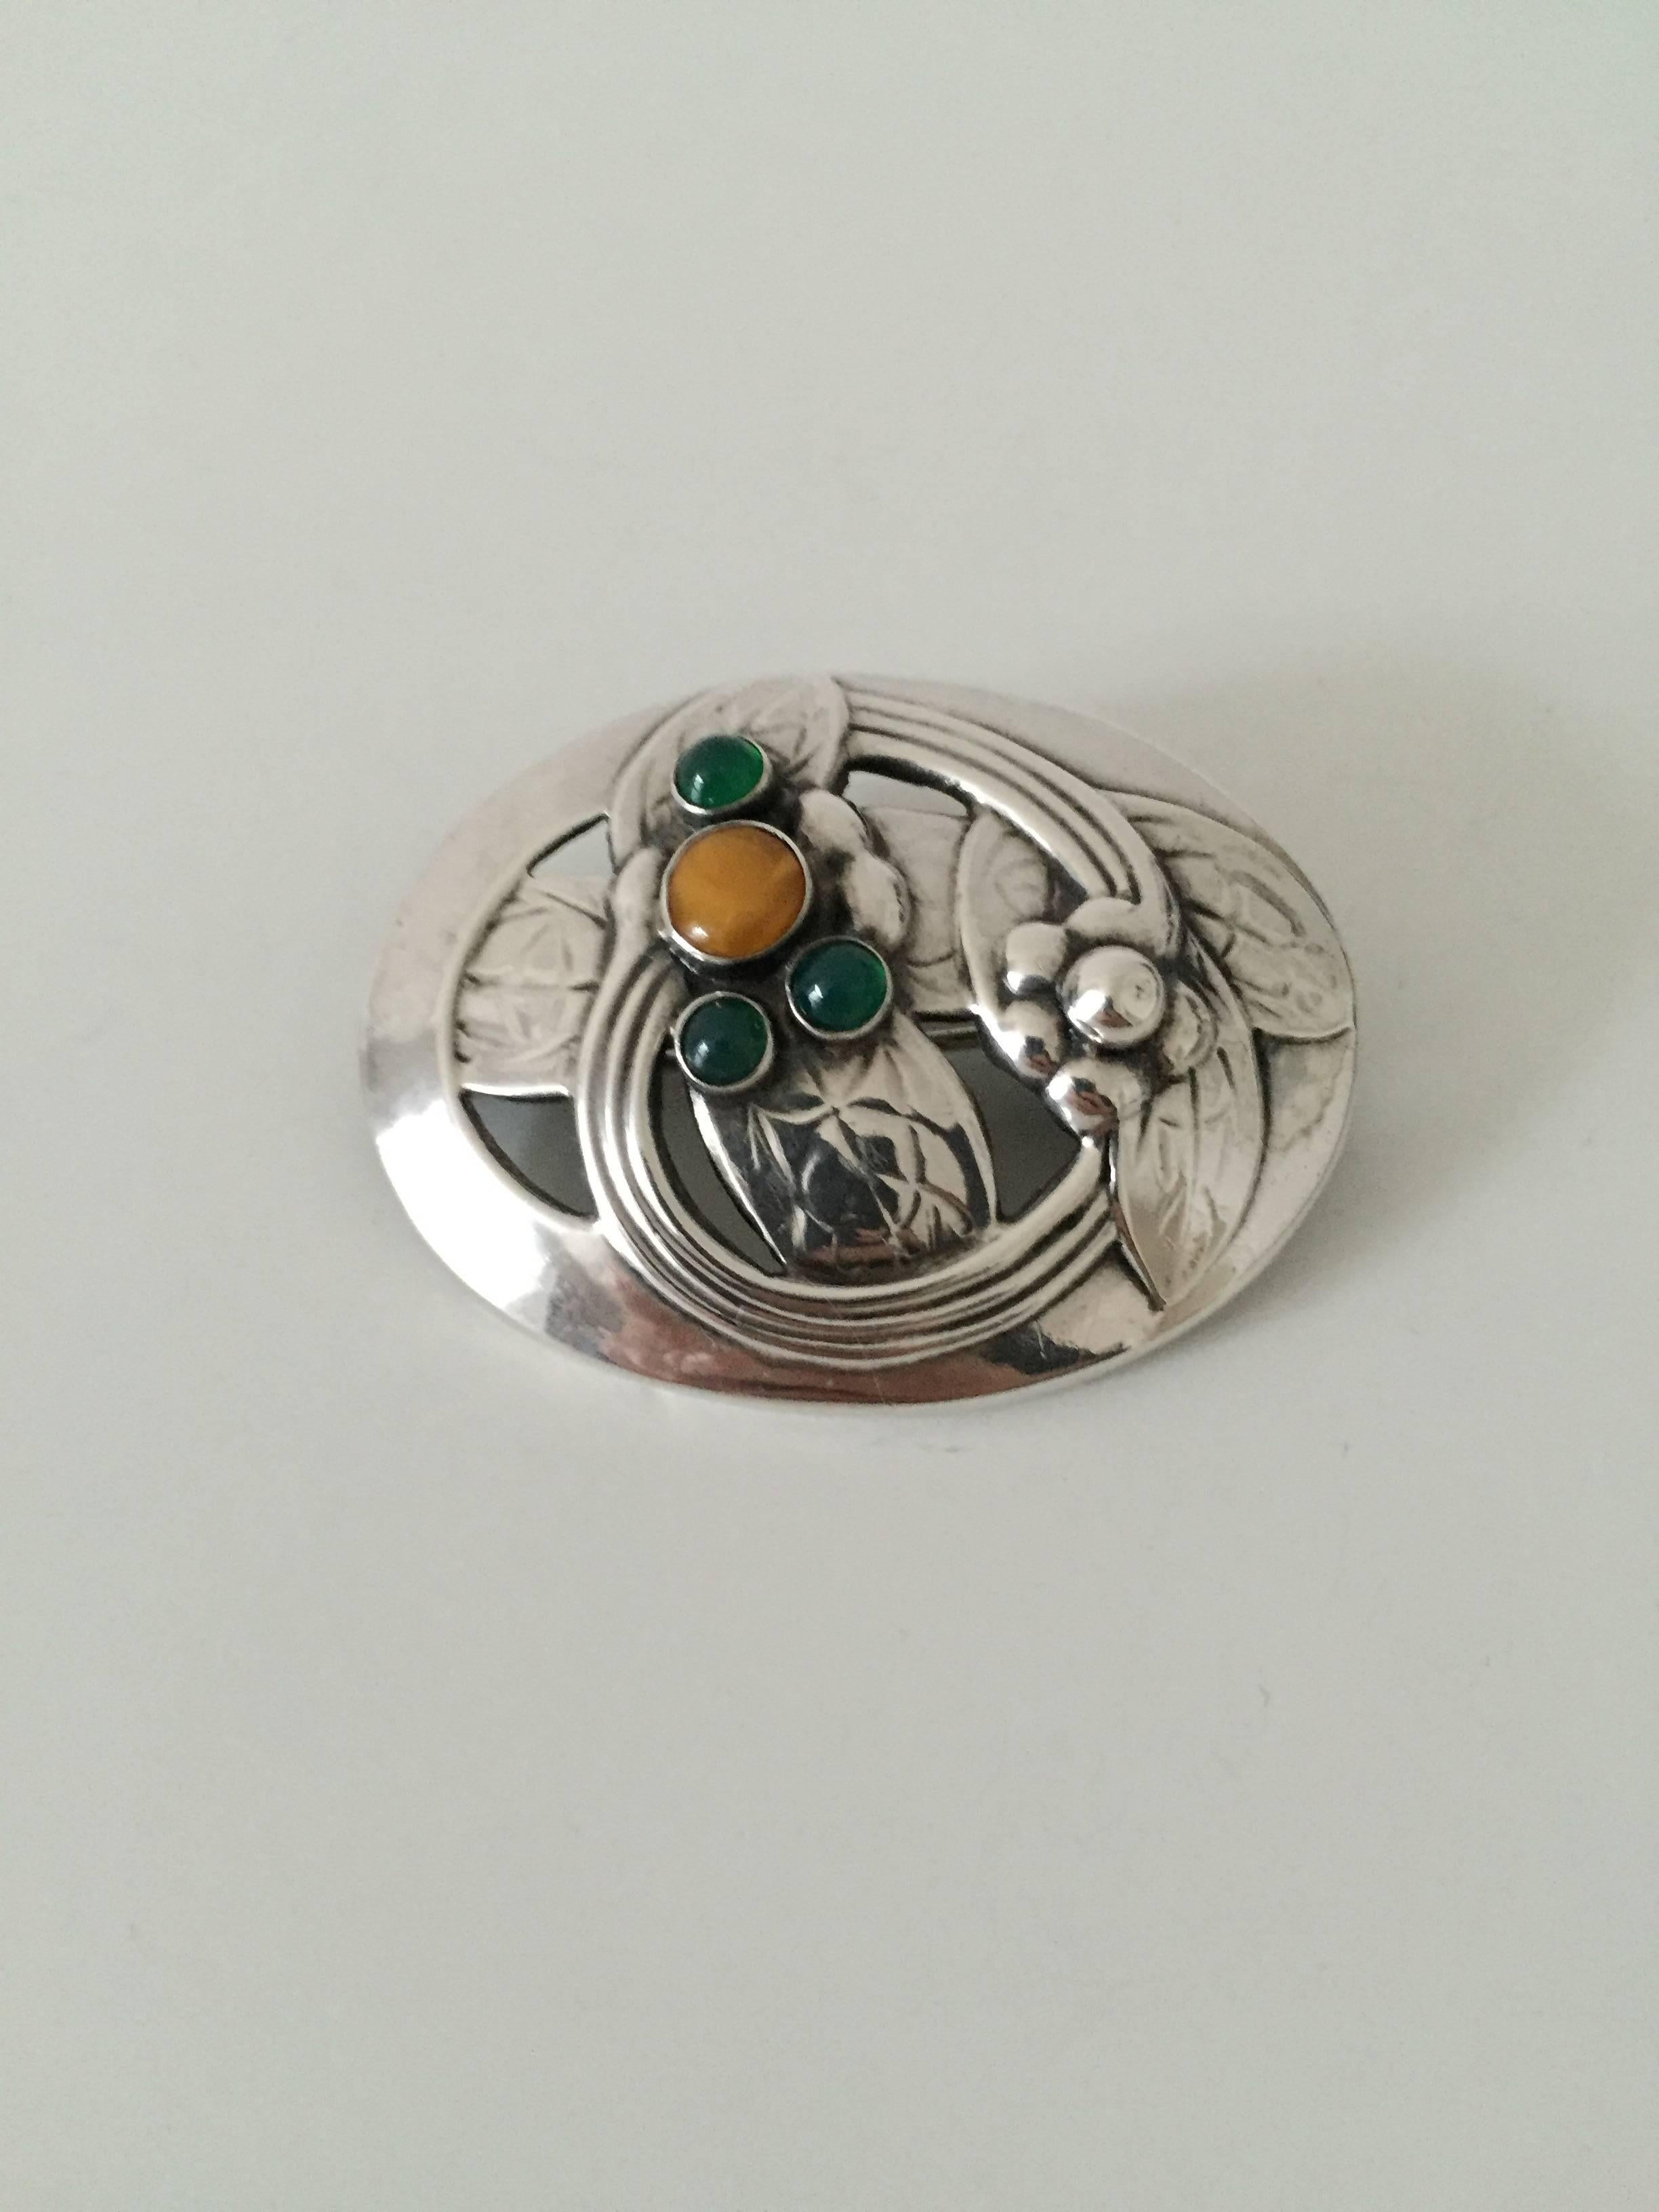 Georg Jensen sterling silver brooch #13 with amber and green stones. From 1904-1914.

Measures 5 cm x 3.9 cm (1 31/32